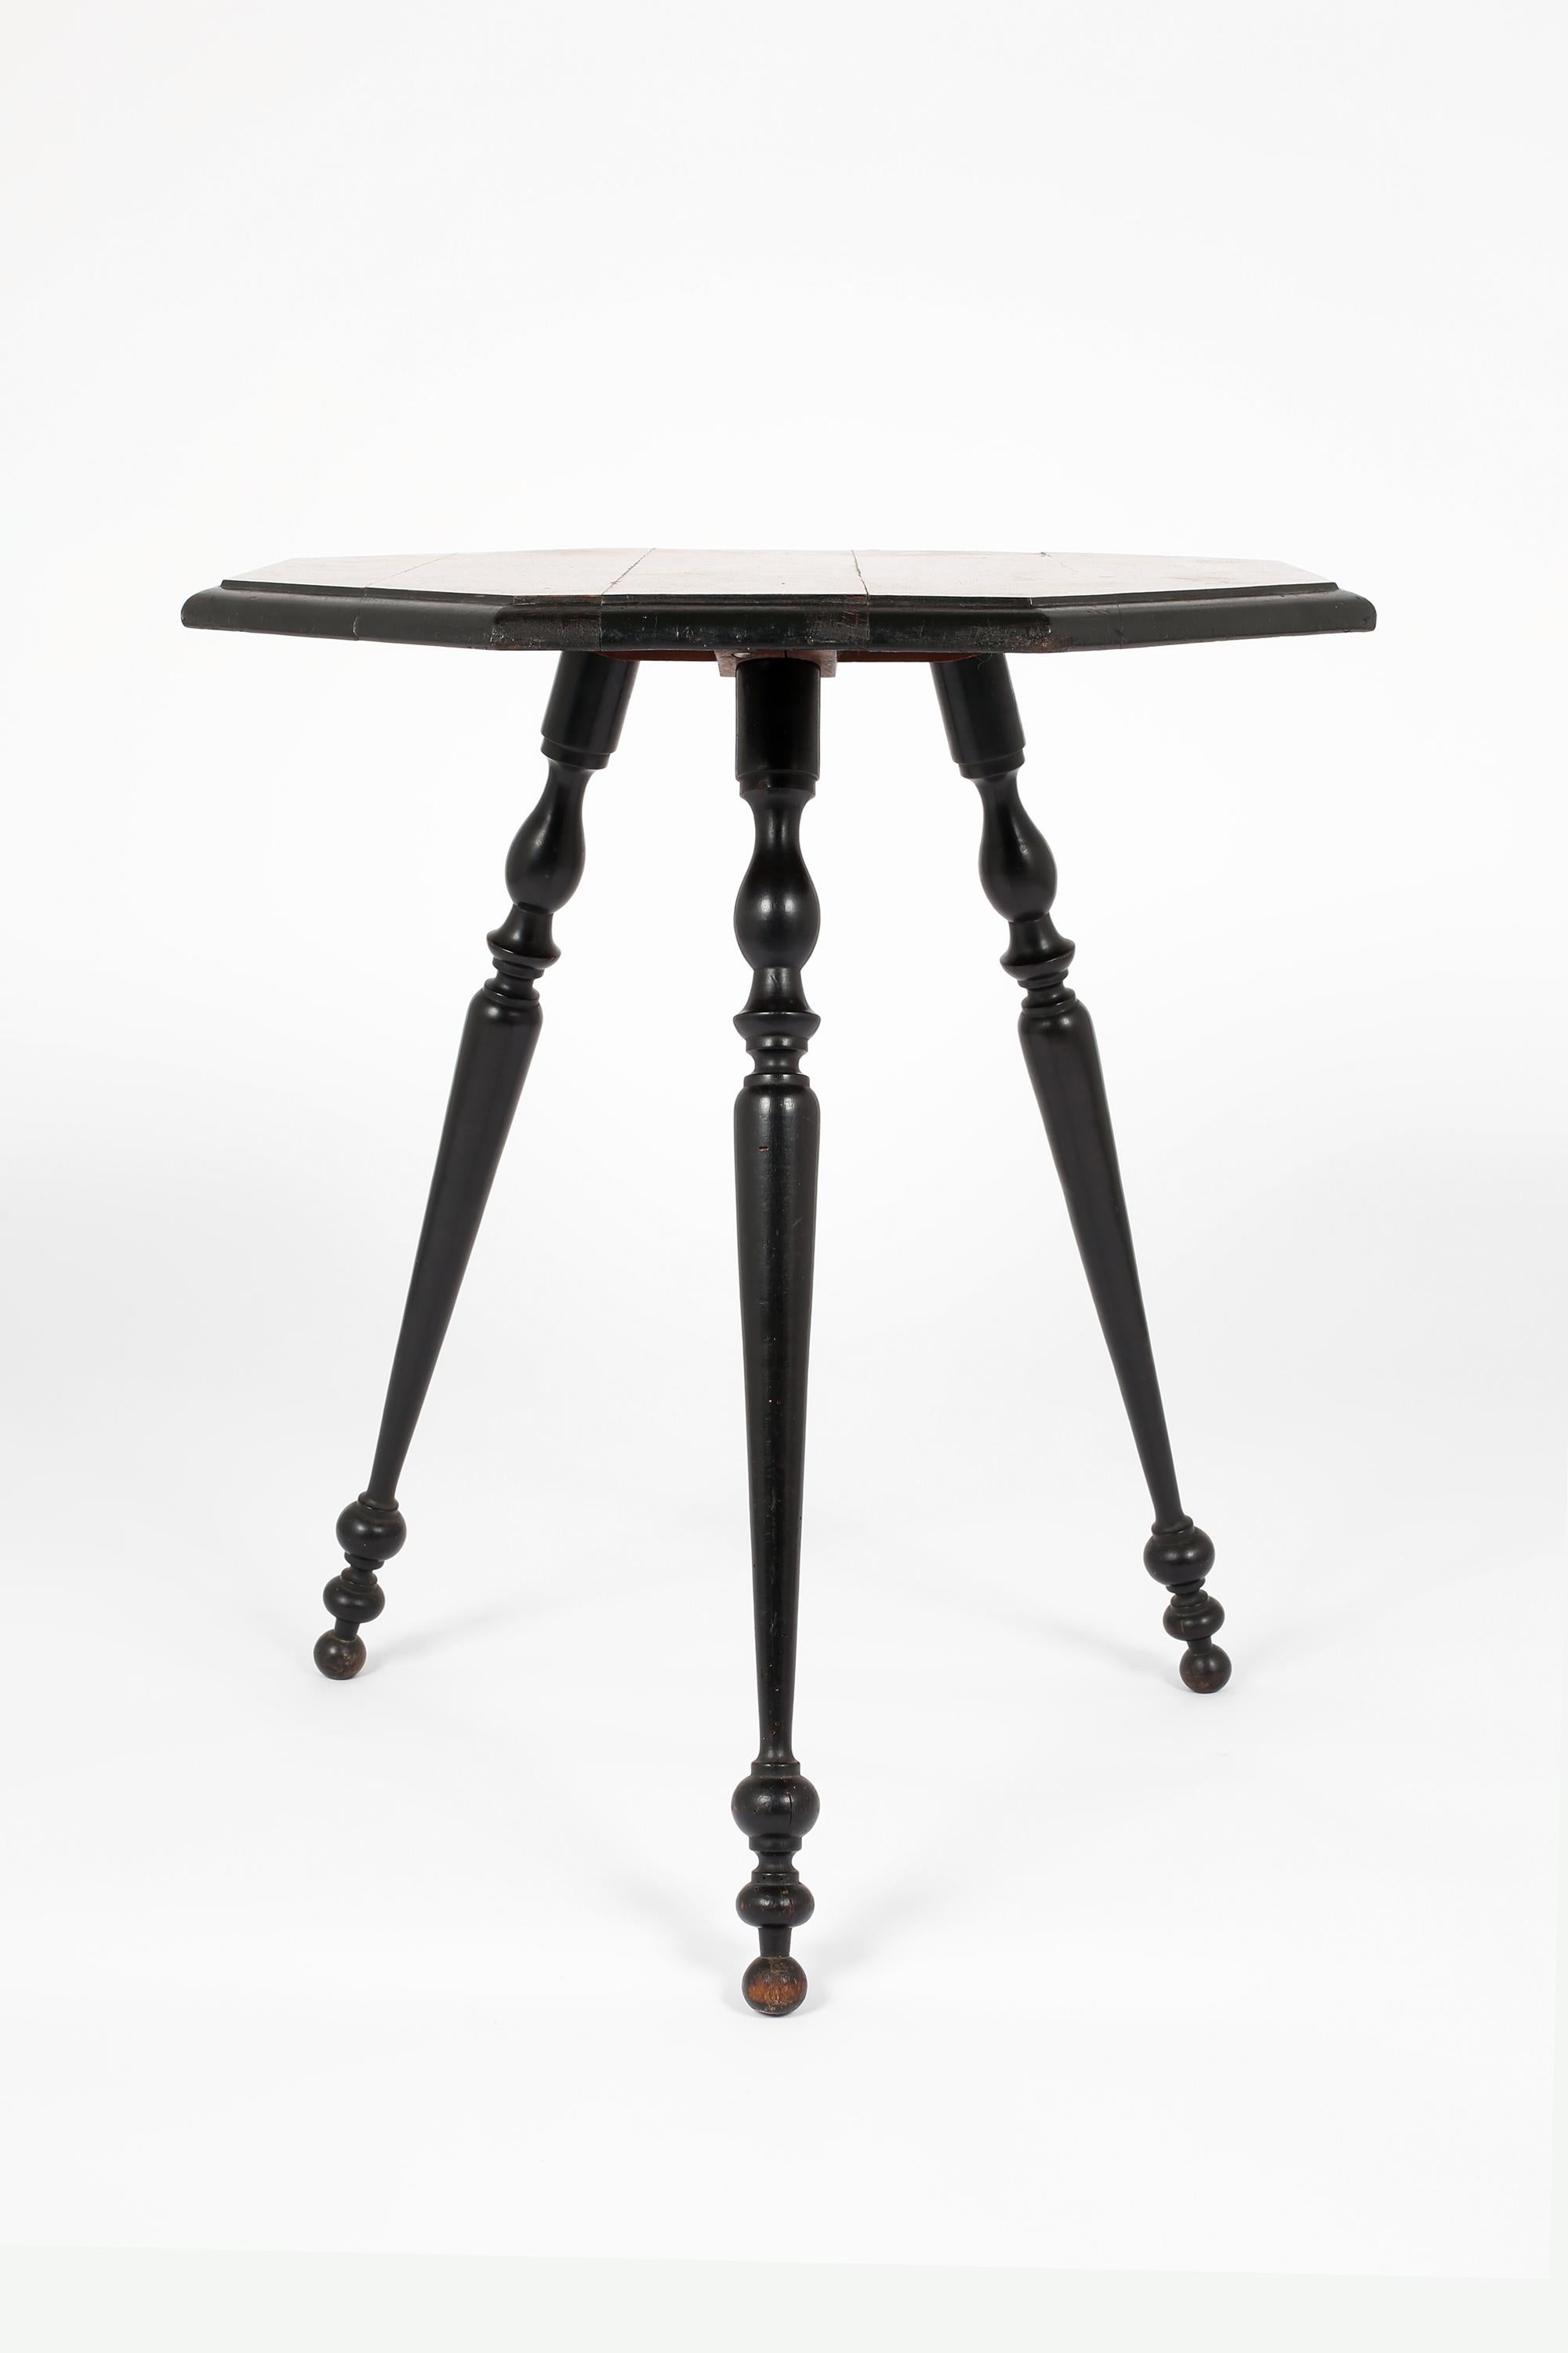 An early 20th century ebonised octagonal occasional table, with intricate foliate marquetry top and turned legs. French, c. 1900.